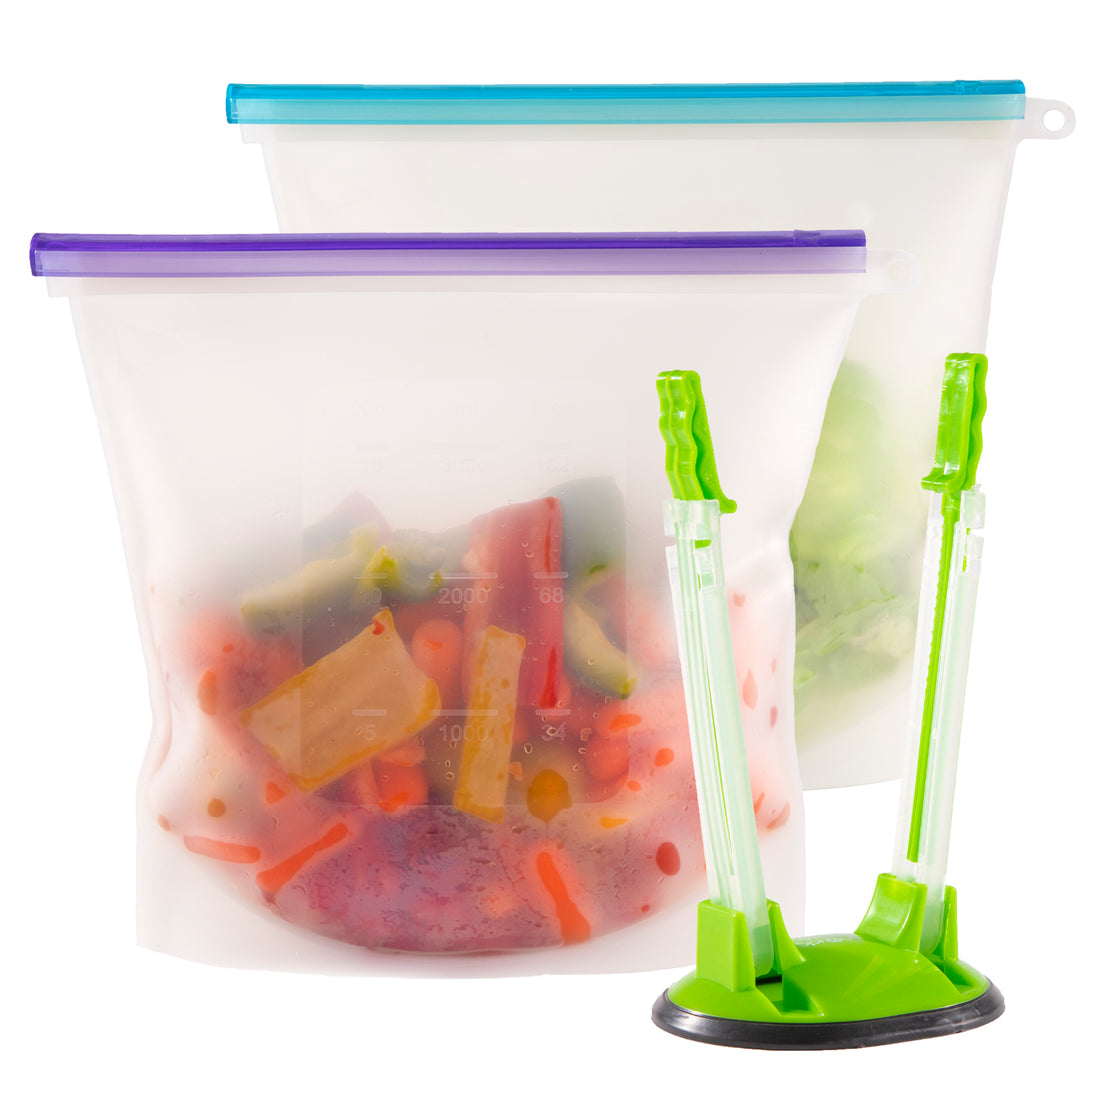 Reusable Food Storage Containers at